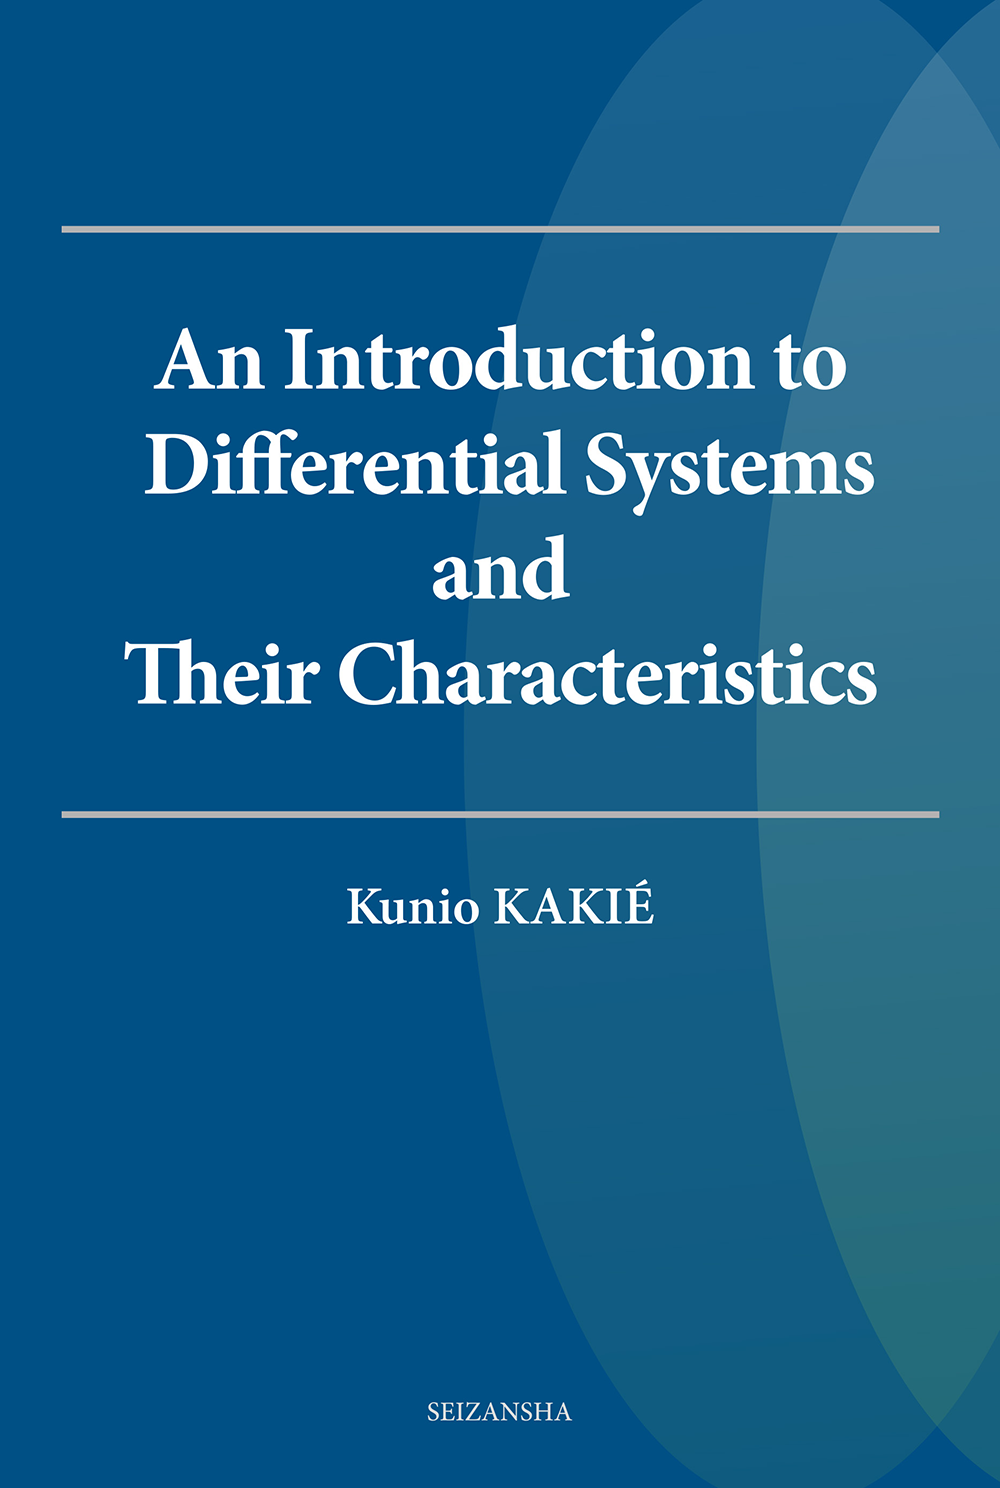 An Introduction to Differential Systems and Their Characteristics